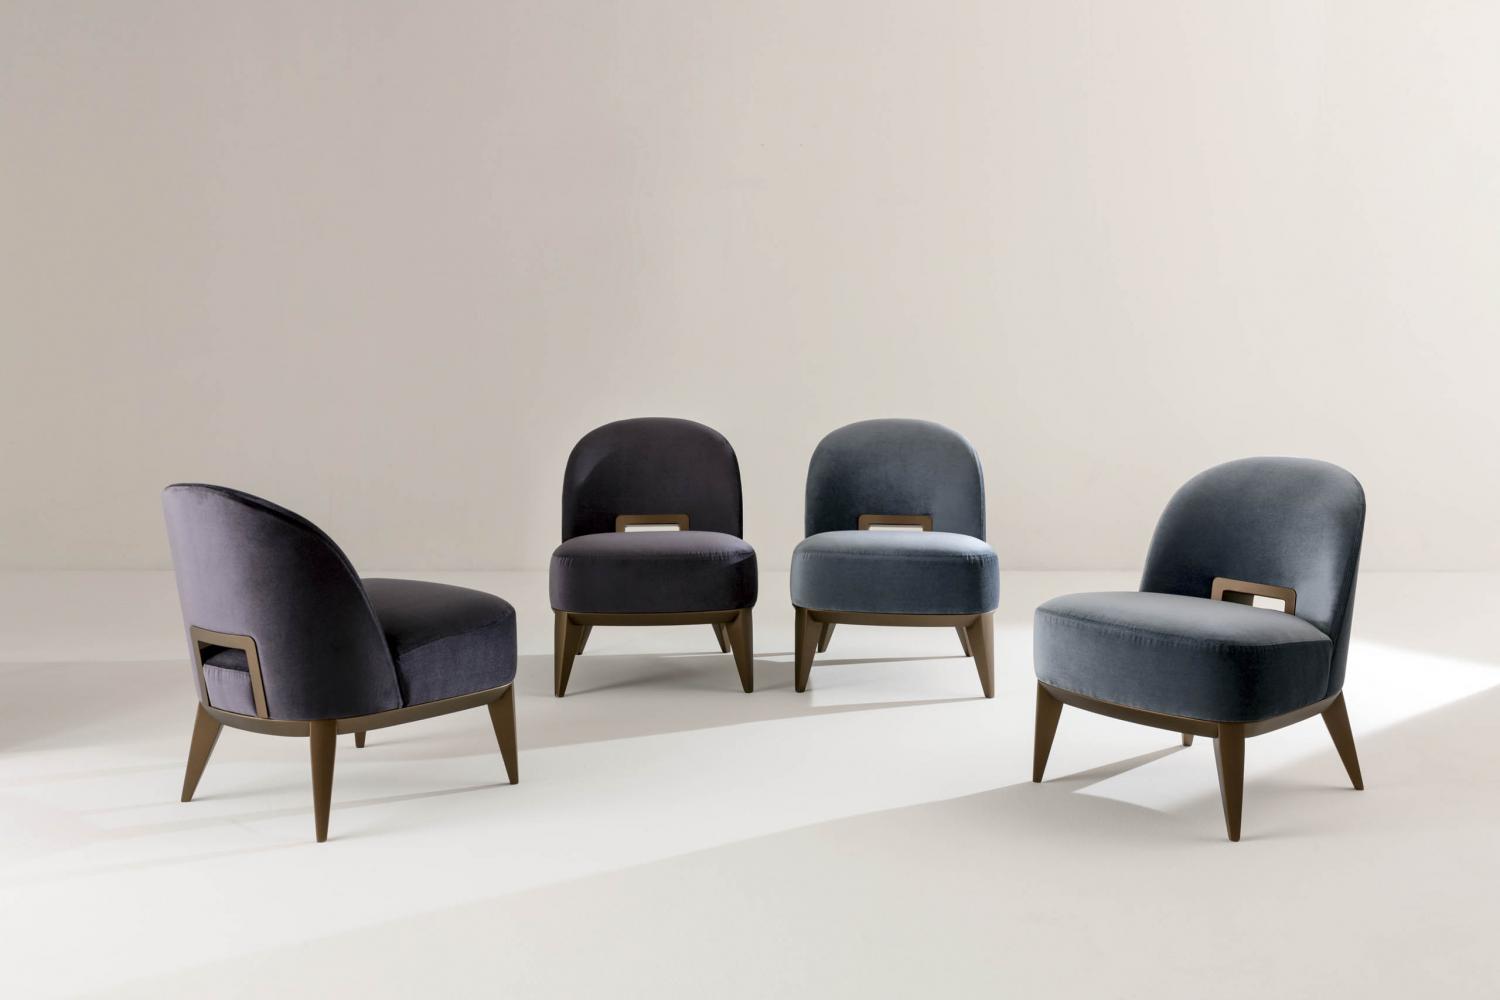 Margaret is a modern armchair in leather, velvet or fabric with wooden handle